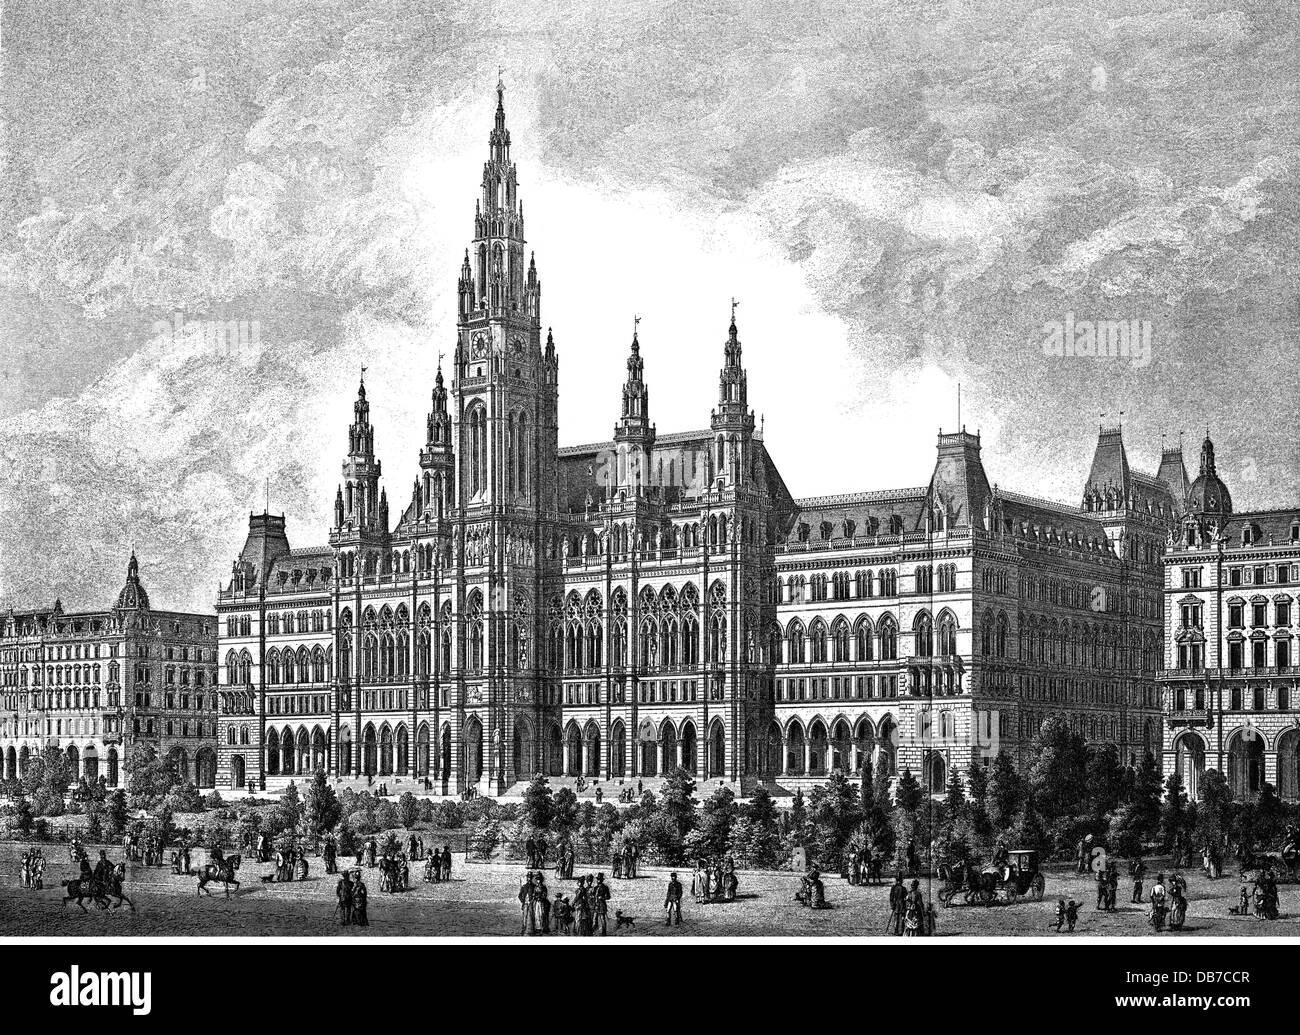 geography / travel, Austria, Vienna, building, New City Hall at Franzensring, built 1872 - 1883, architect: Friedrich von Schmidt, exterior view, wood engraving, circa 1885, architecture, neo-Gothic style, Gothic Revival, street, streets, Ringstrasse, Dr-Karl-Lueger-Ring, Dr - Karl - Lueger - Ring, people, transport, transportation, inner city, midtown, city centre, town centre, urban core, 1st district, Austria-Hungary, Austria - Hungary, Dual-Monarchy, Cisleithania, Central Europe, 19th century, historic, historical, Additional-Rights-Clearences-Not Available Stock Photo